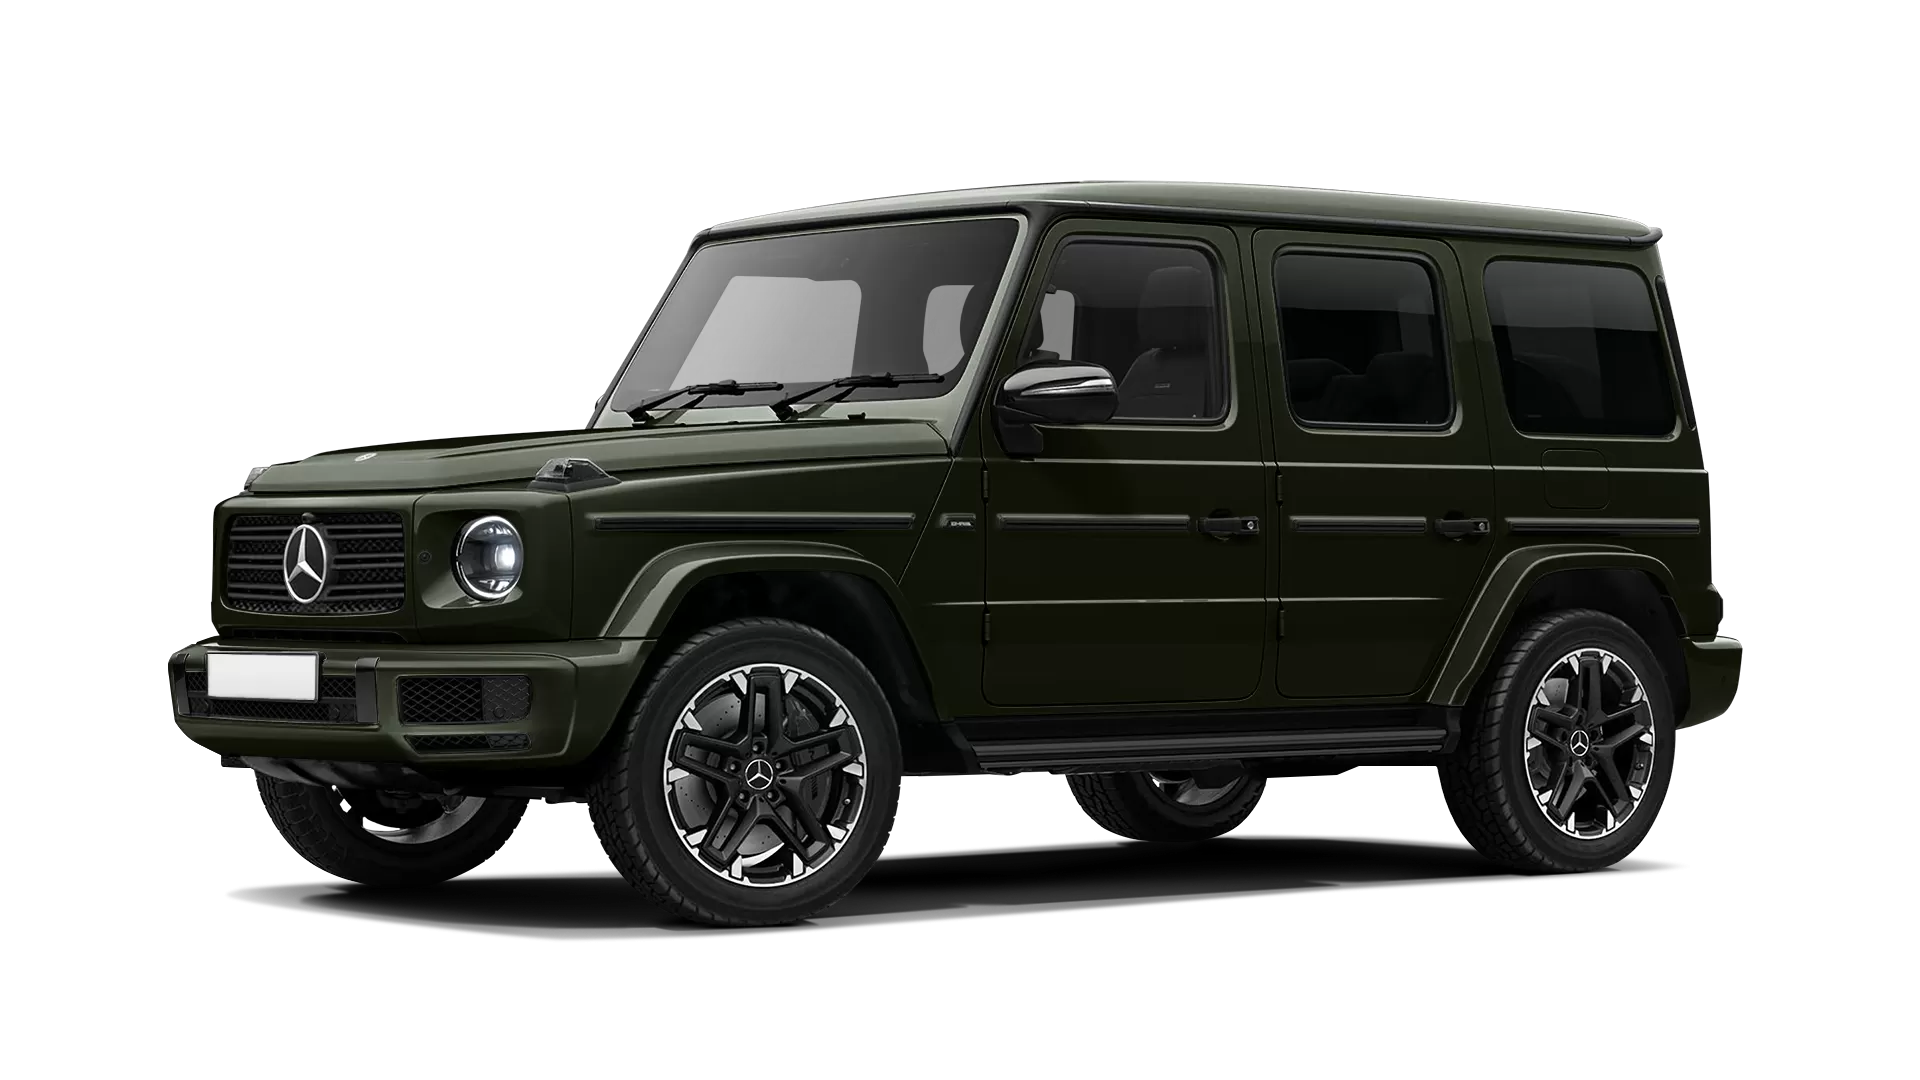 Mercedes G class W463 stock front view in Dark Olive color